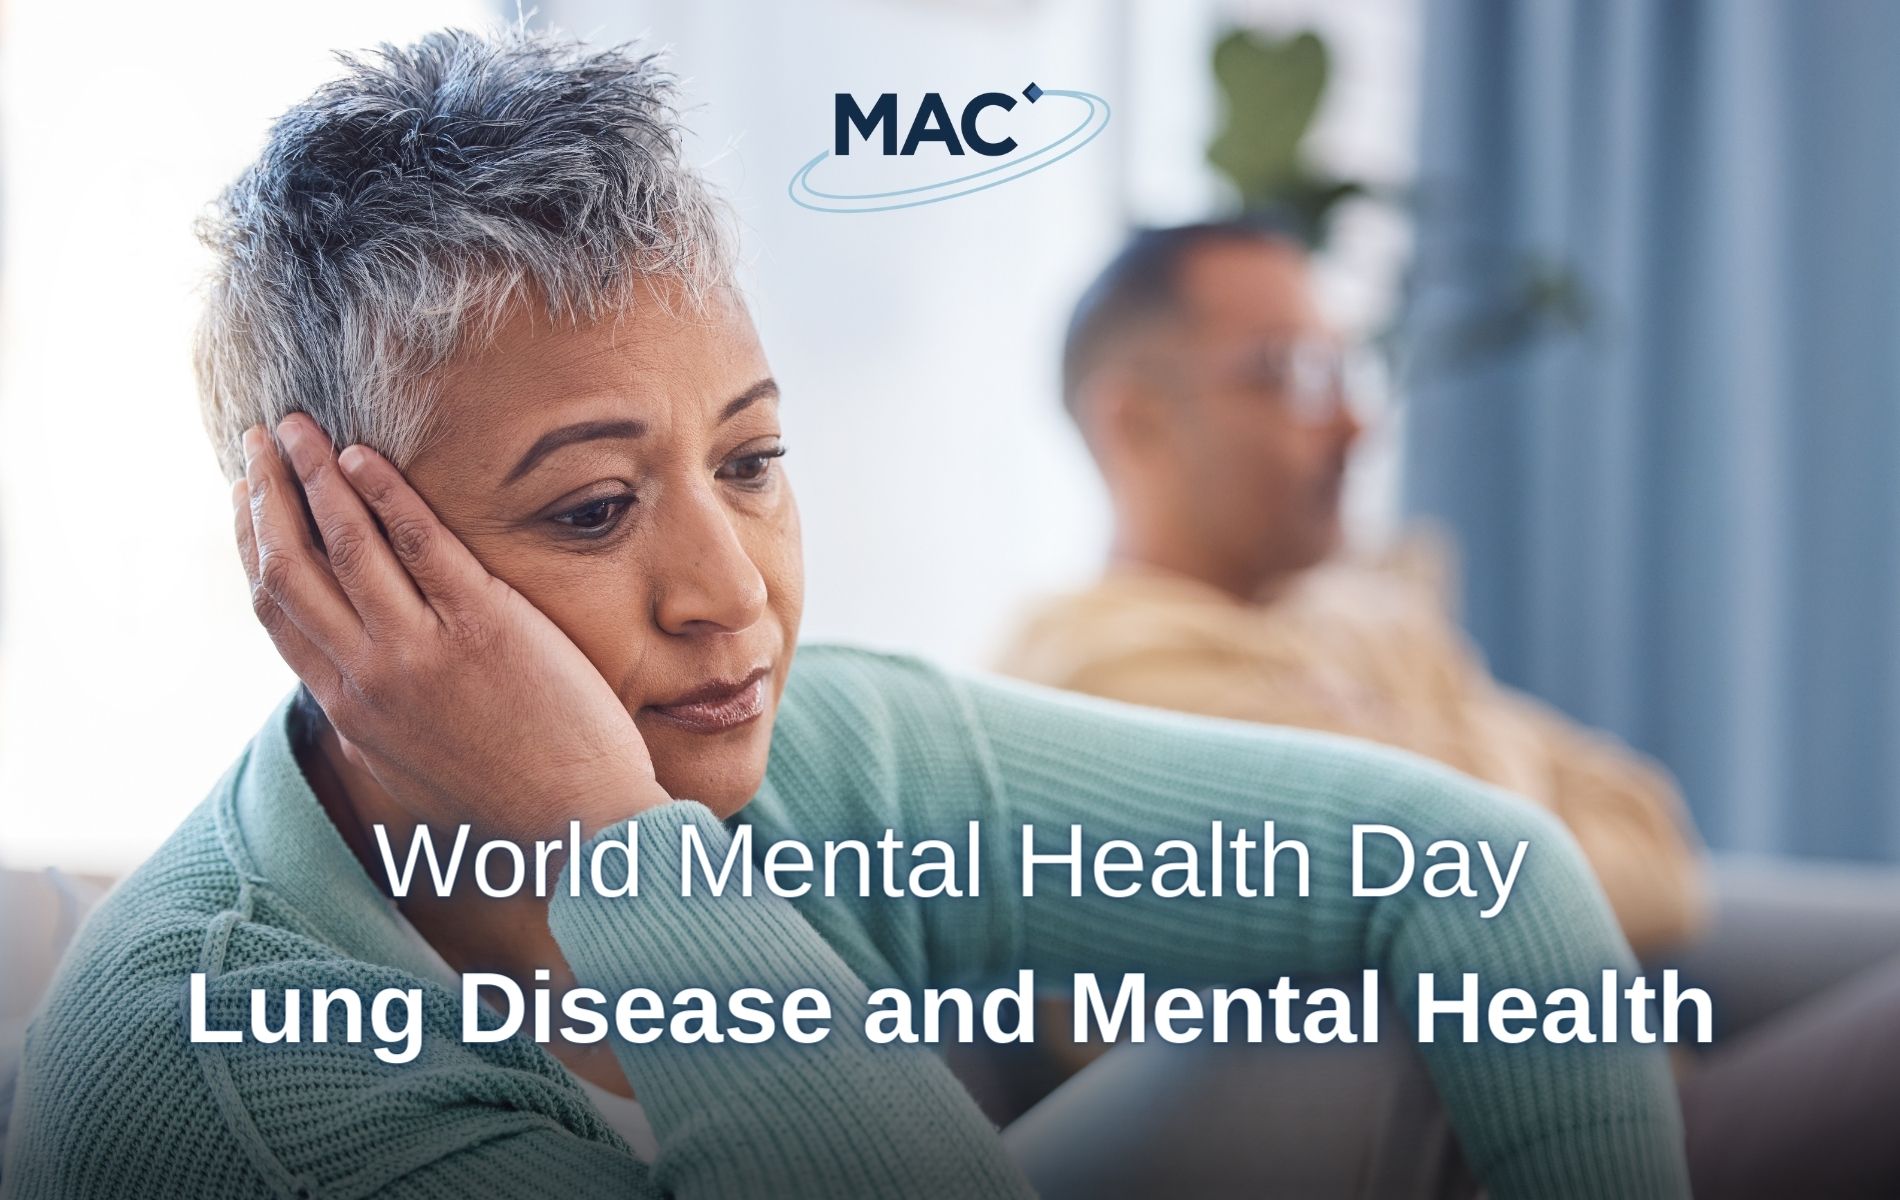 World Mental Health Day - Lung Diseases and Mental Health